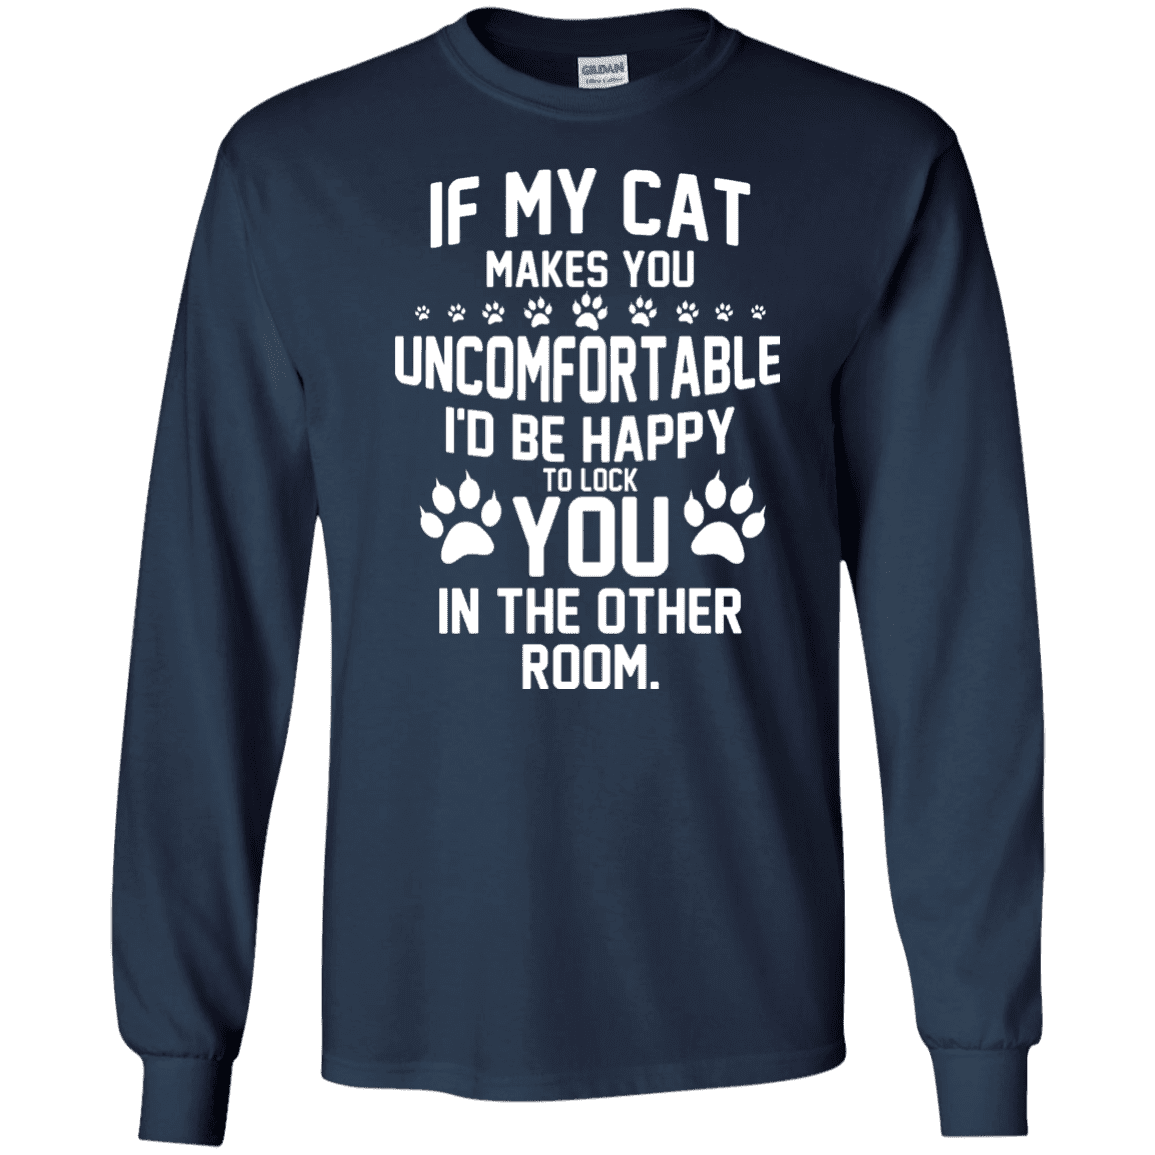 If My Cat makes You Uncomfortable - Long Sleeve T Shirt.